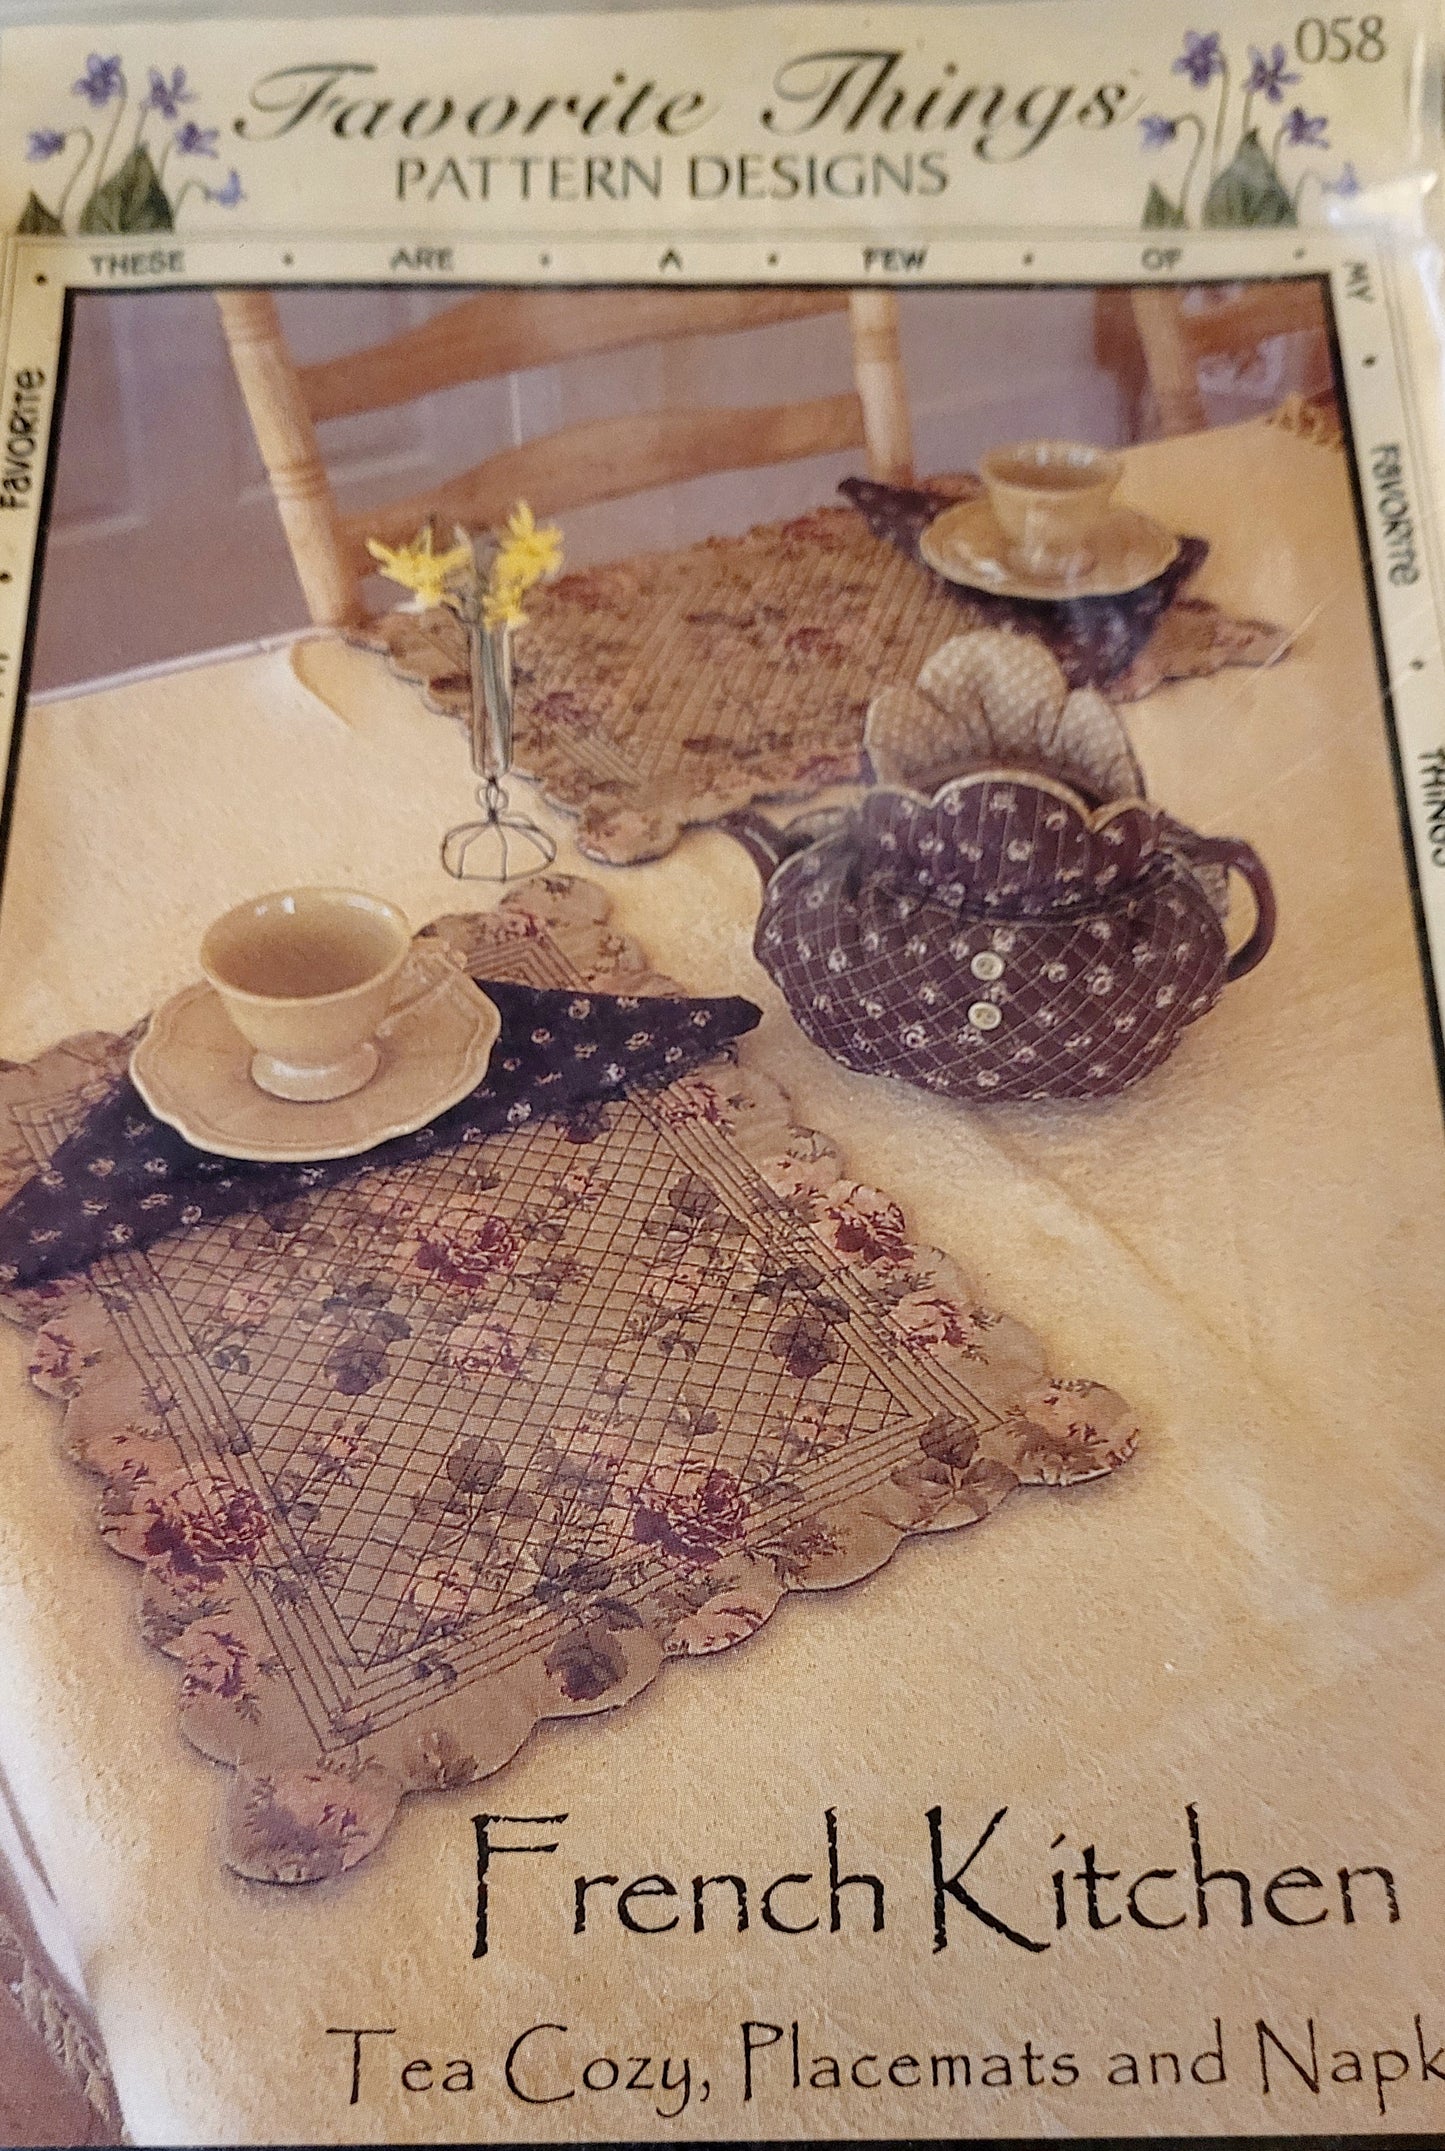 Favorite Things Pattern Designs French Provence Kitchen "Tea Cozy Placemats Napkins" #058